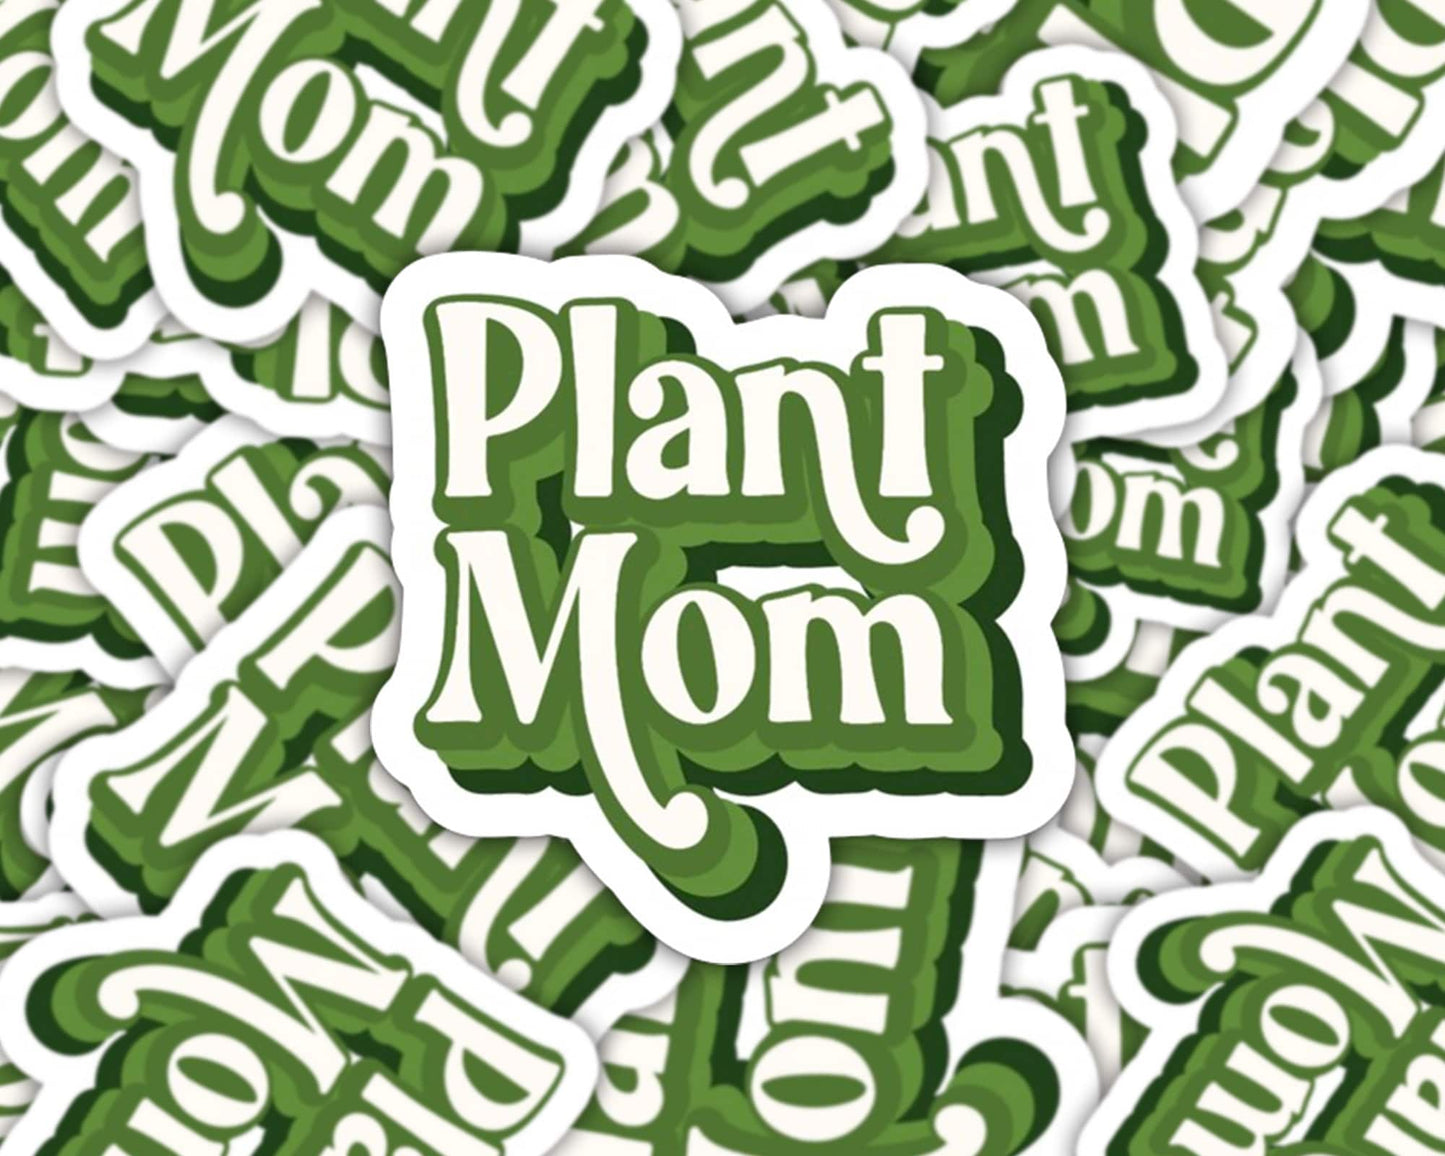 plant mom sticker, plant gift, plant shop, gifts for plant lovers, gifts for mom, plant lover sticker, retro plant sticker, plant stickers